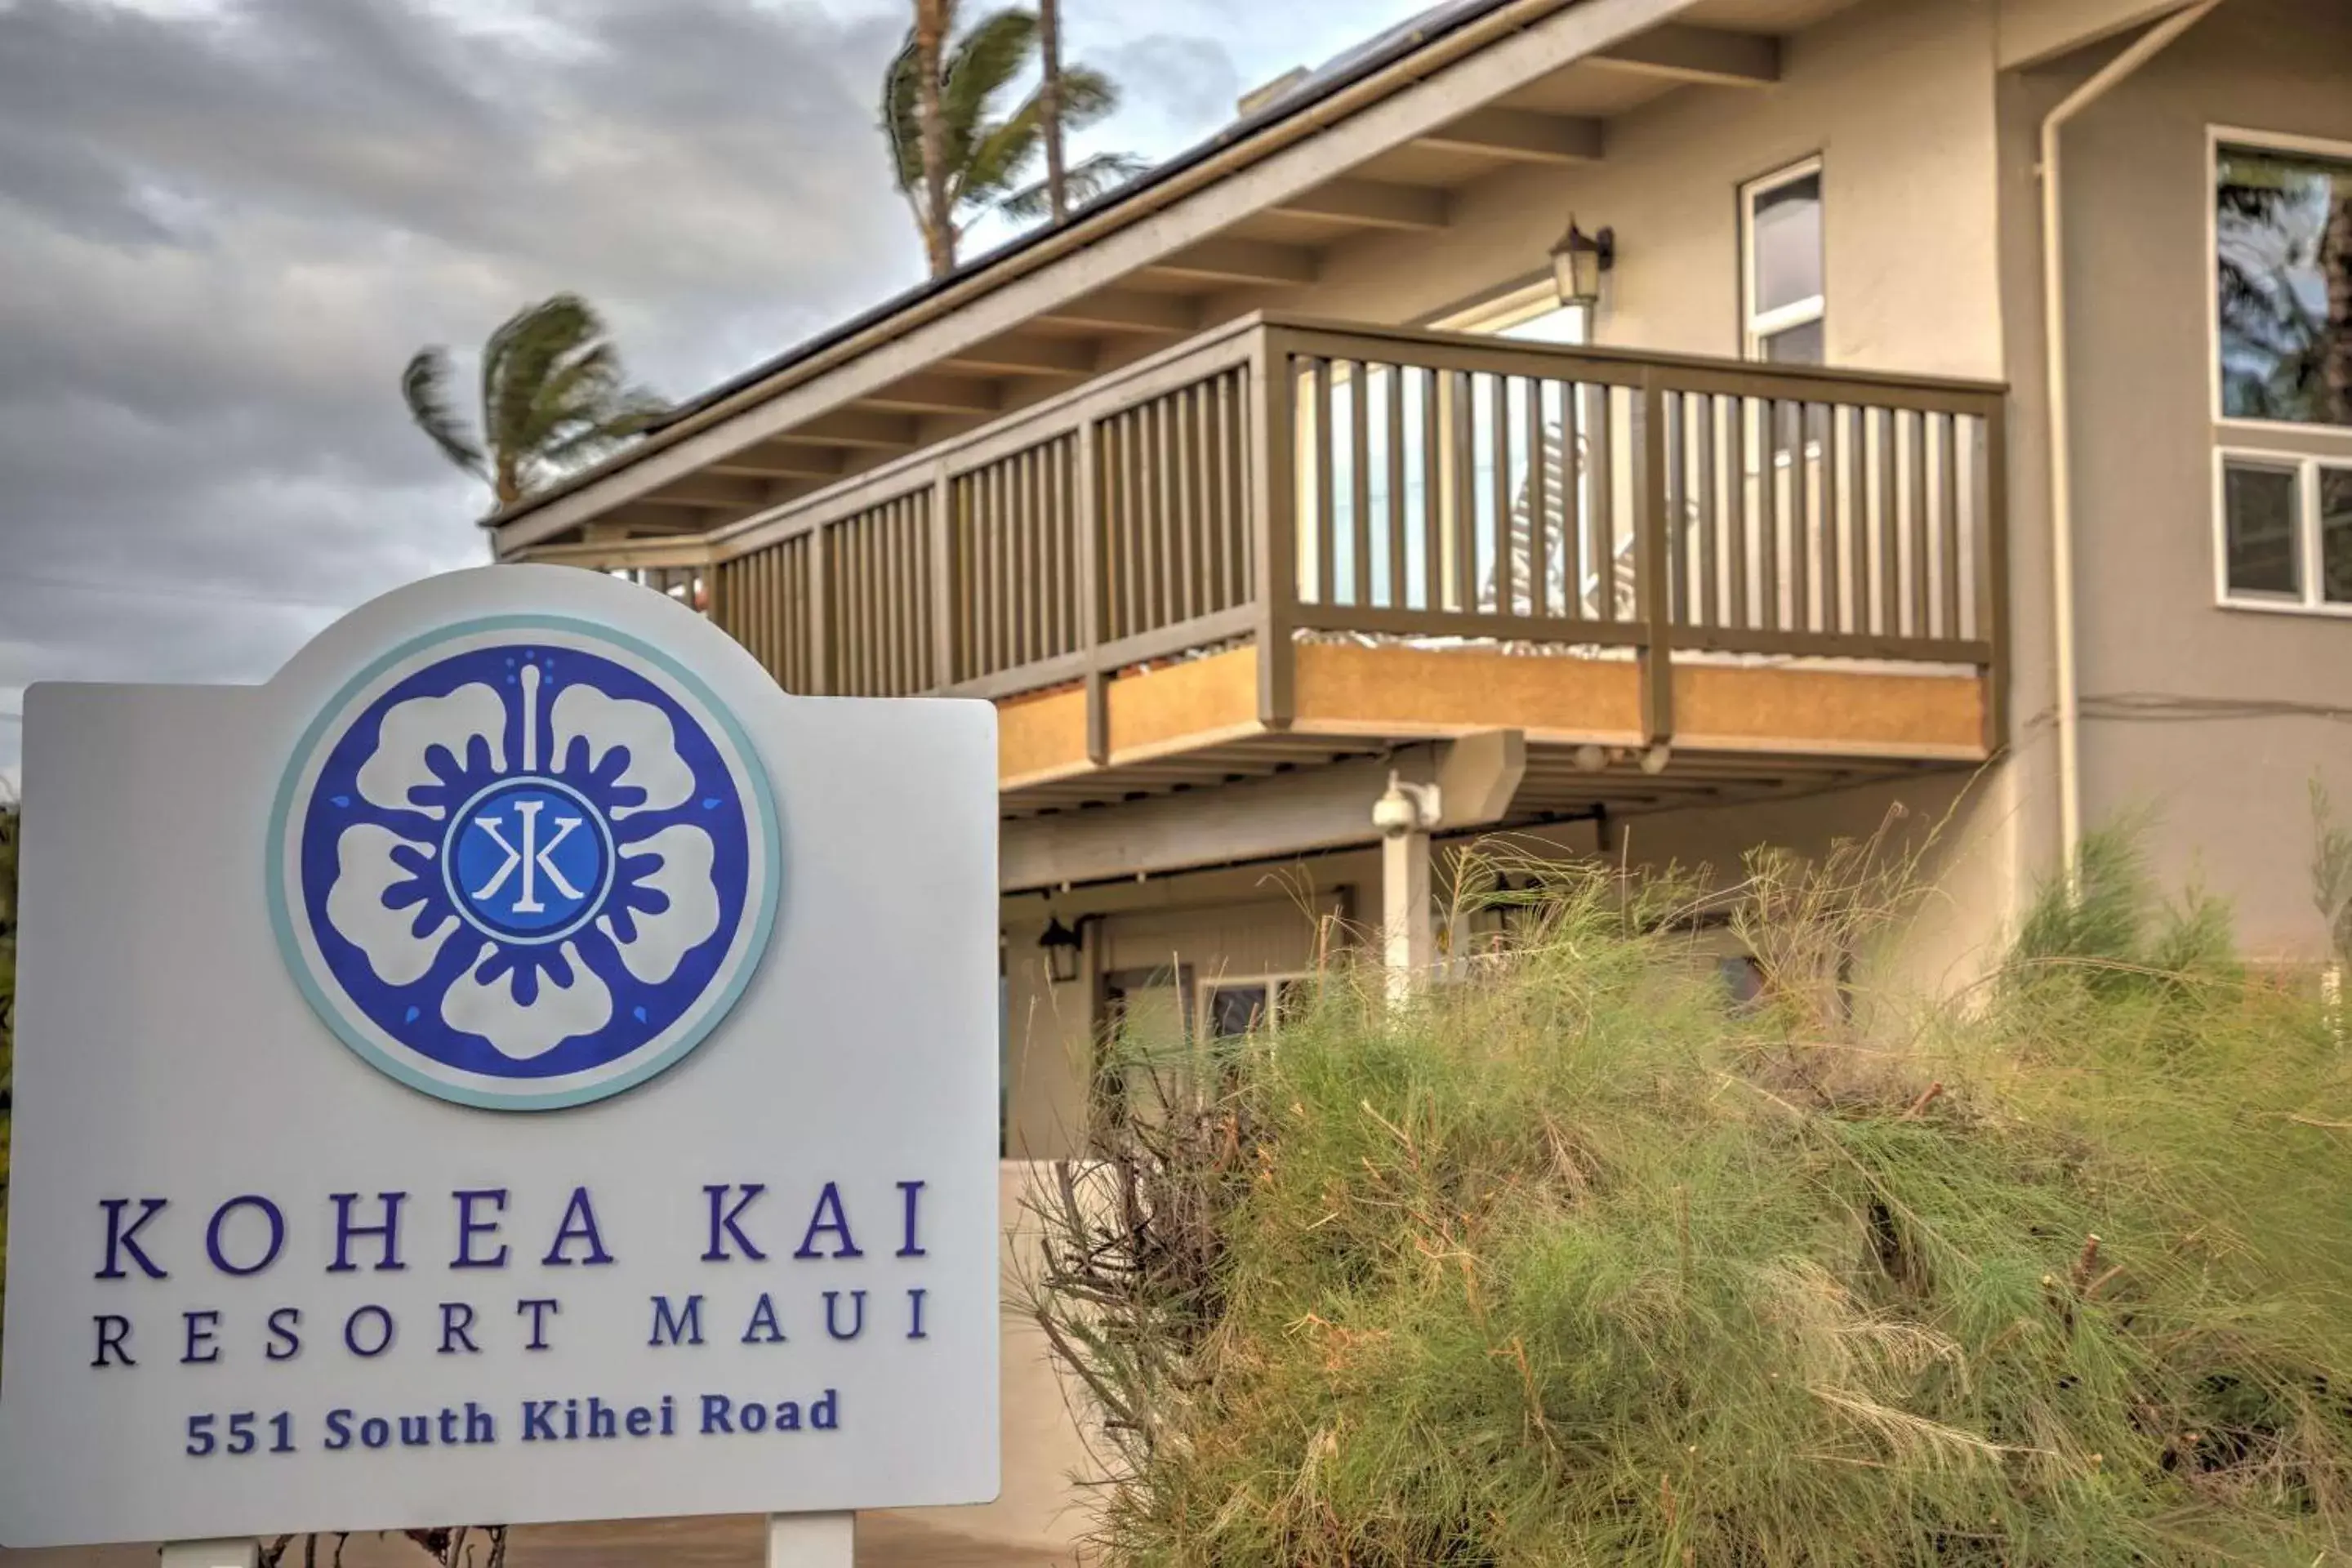 Property Building in Kohea Kai Maui, Ascend Hotel Collection